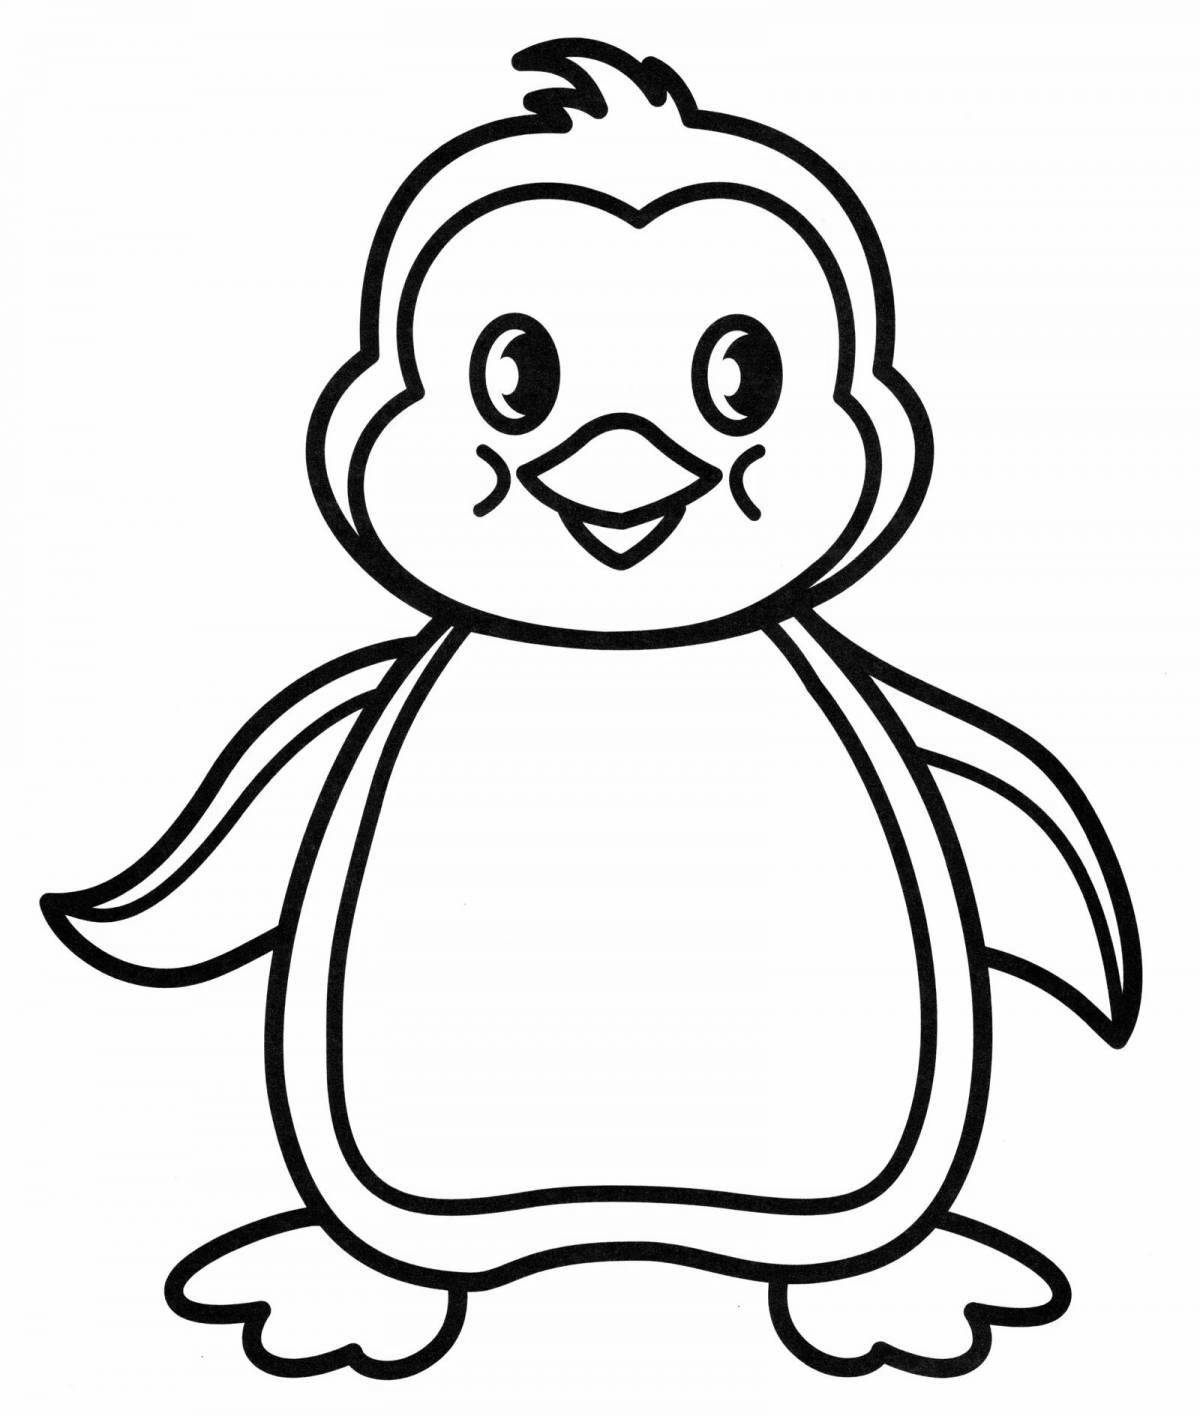 Penguin drawing #3